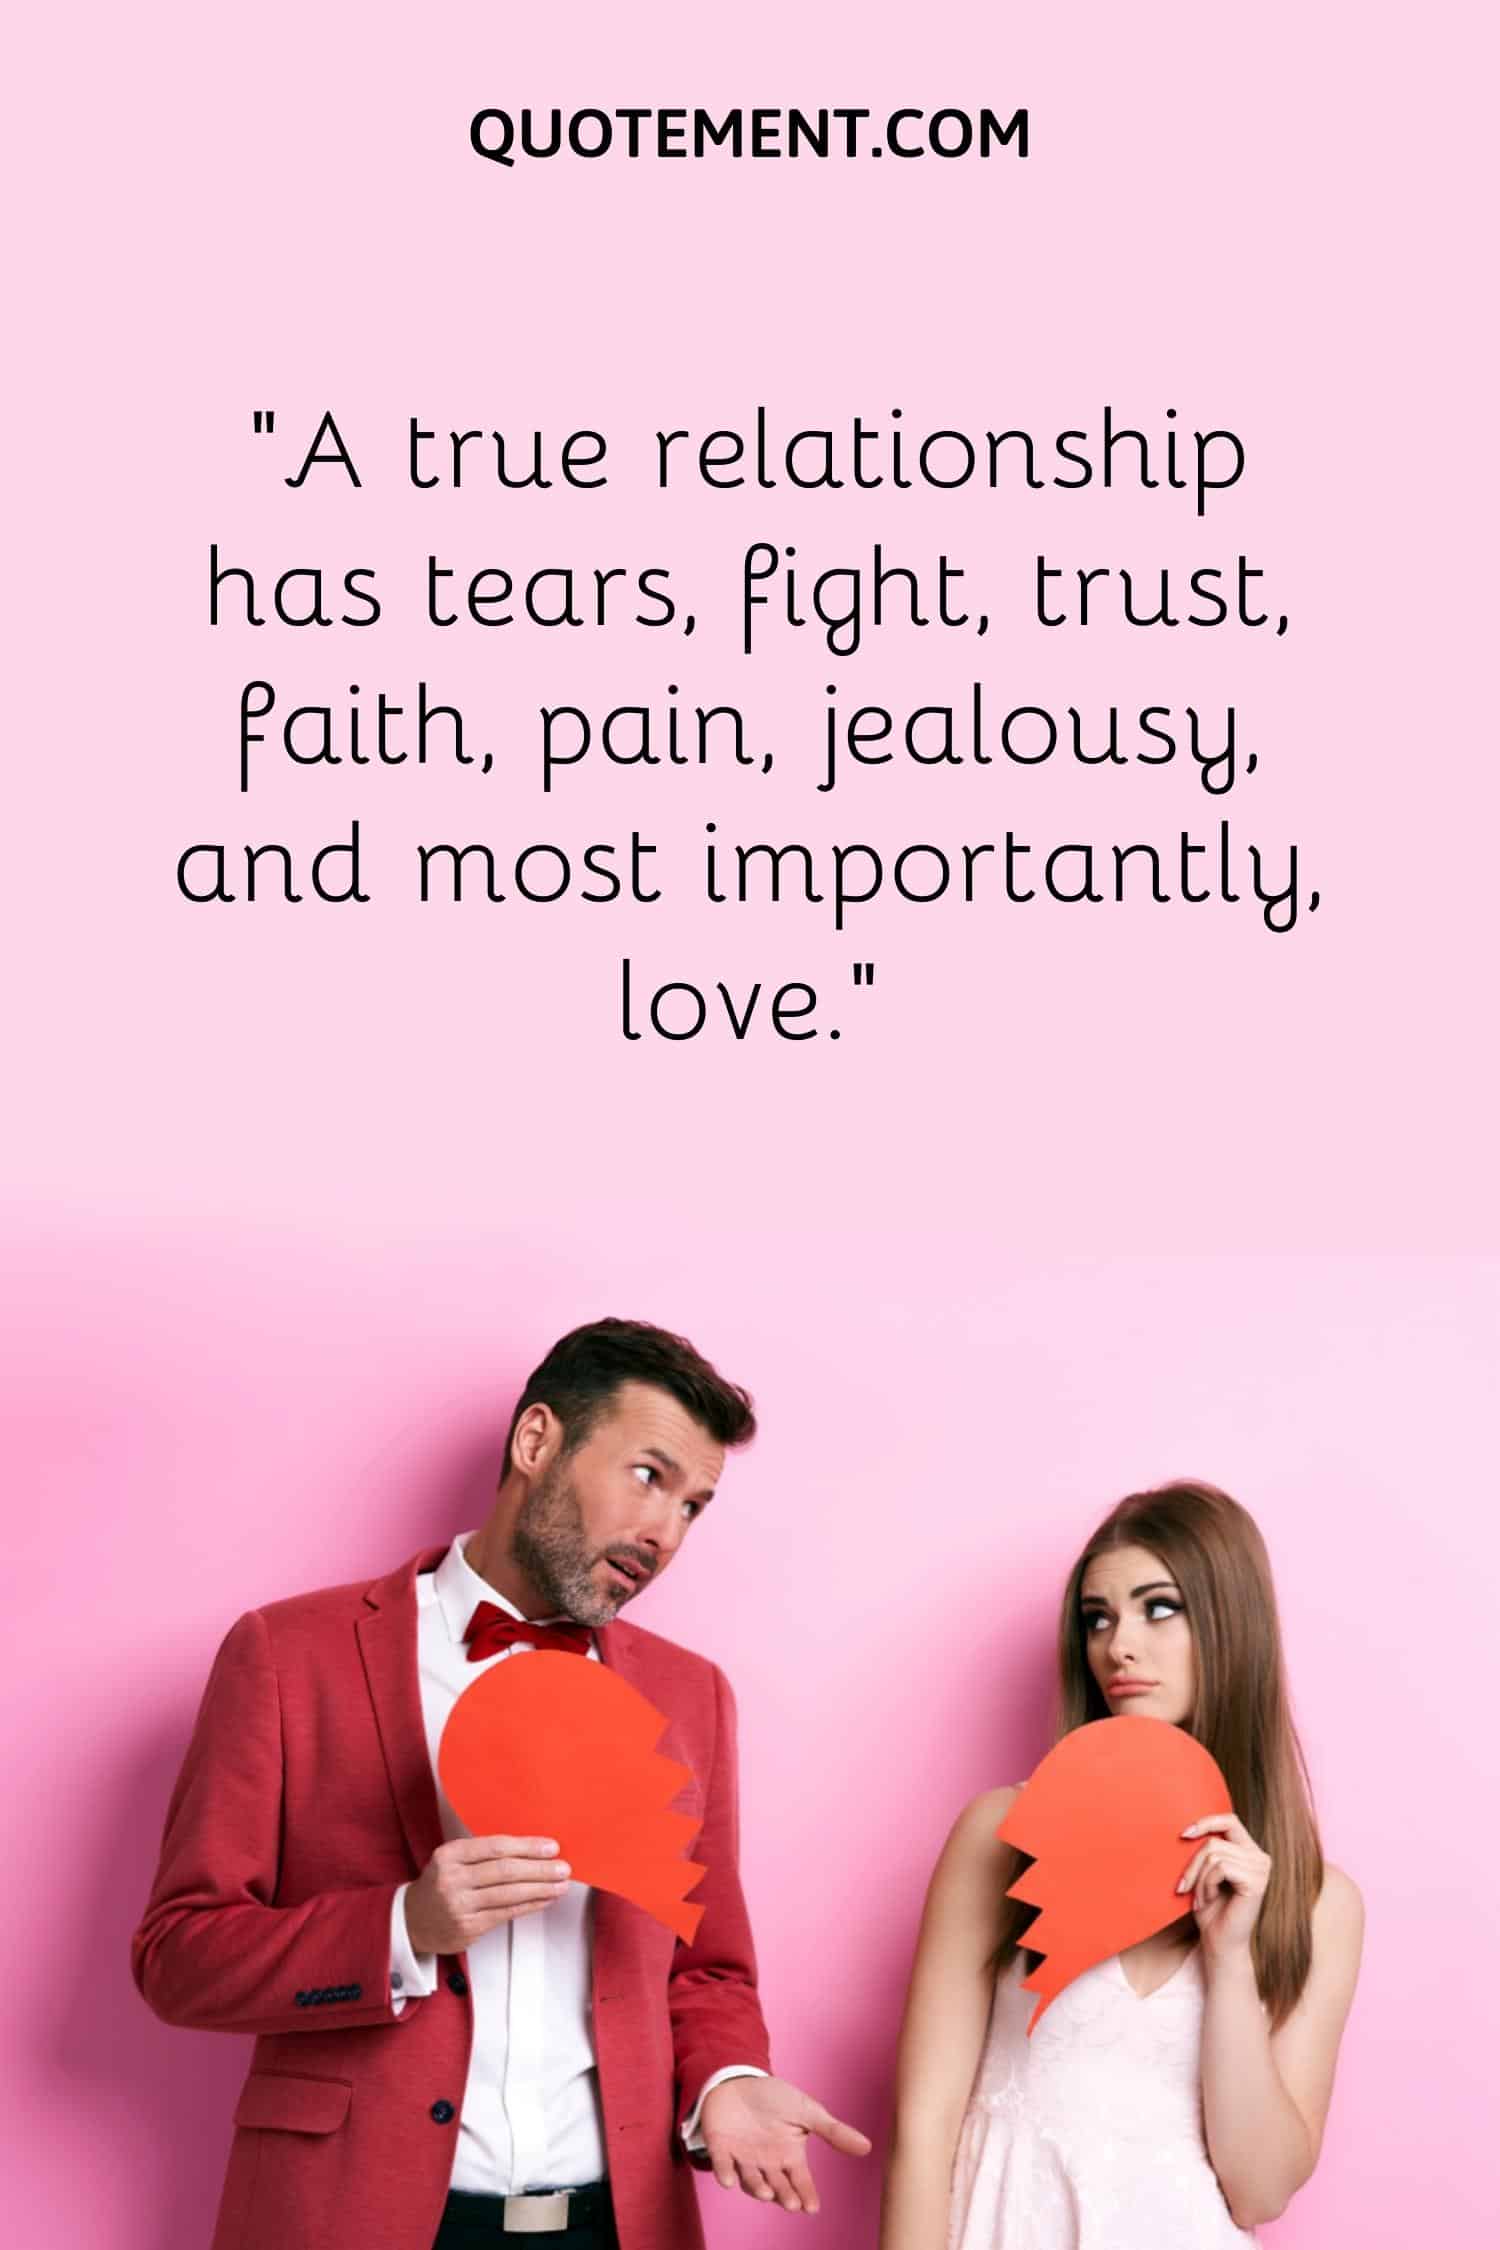 “A true relationship has tears, fight, trust, faith, pain, jealousy, and most importantly, love.”